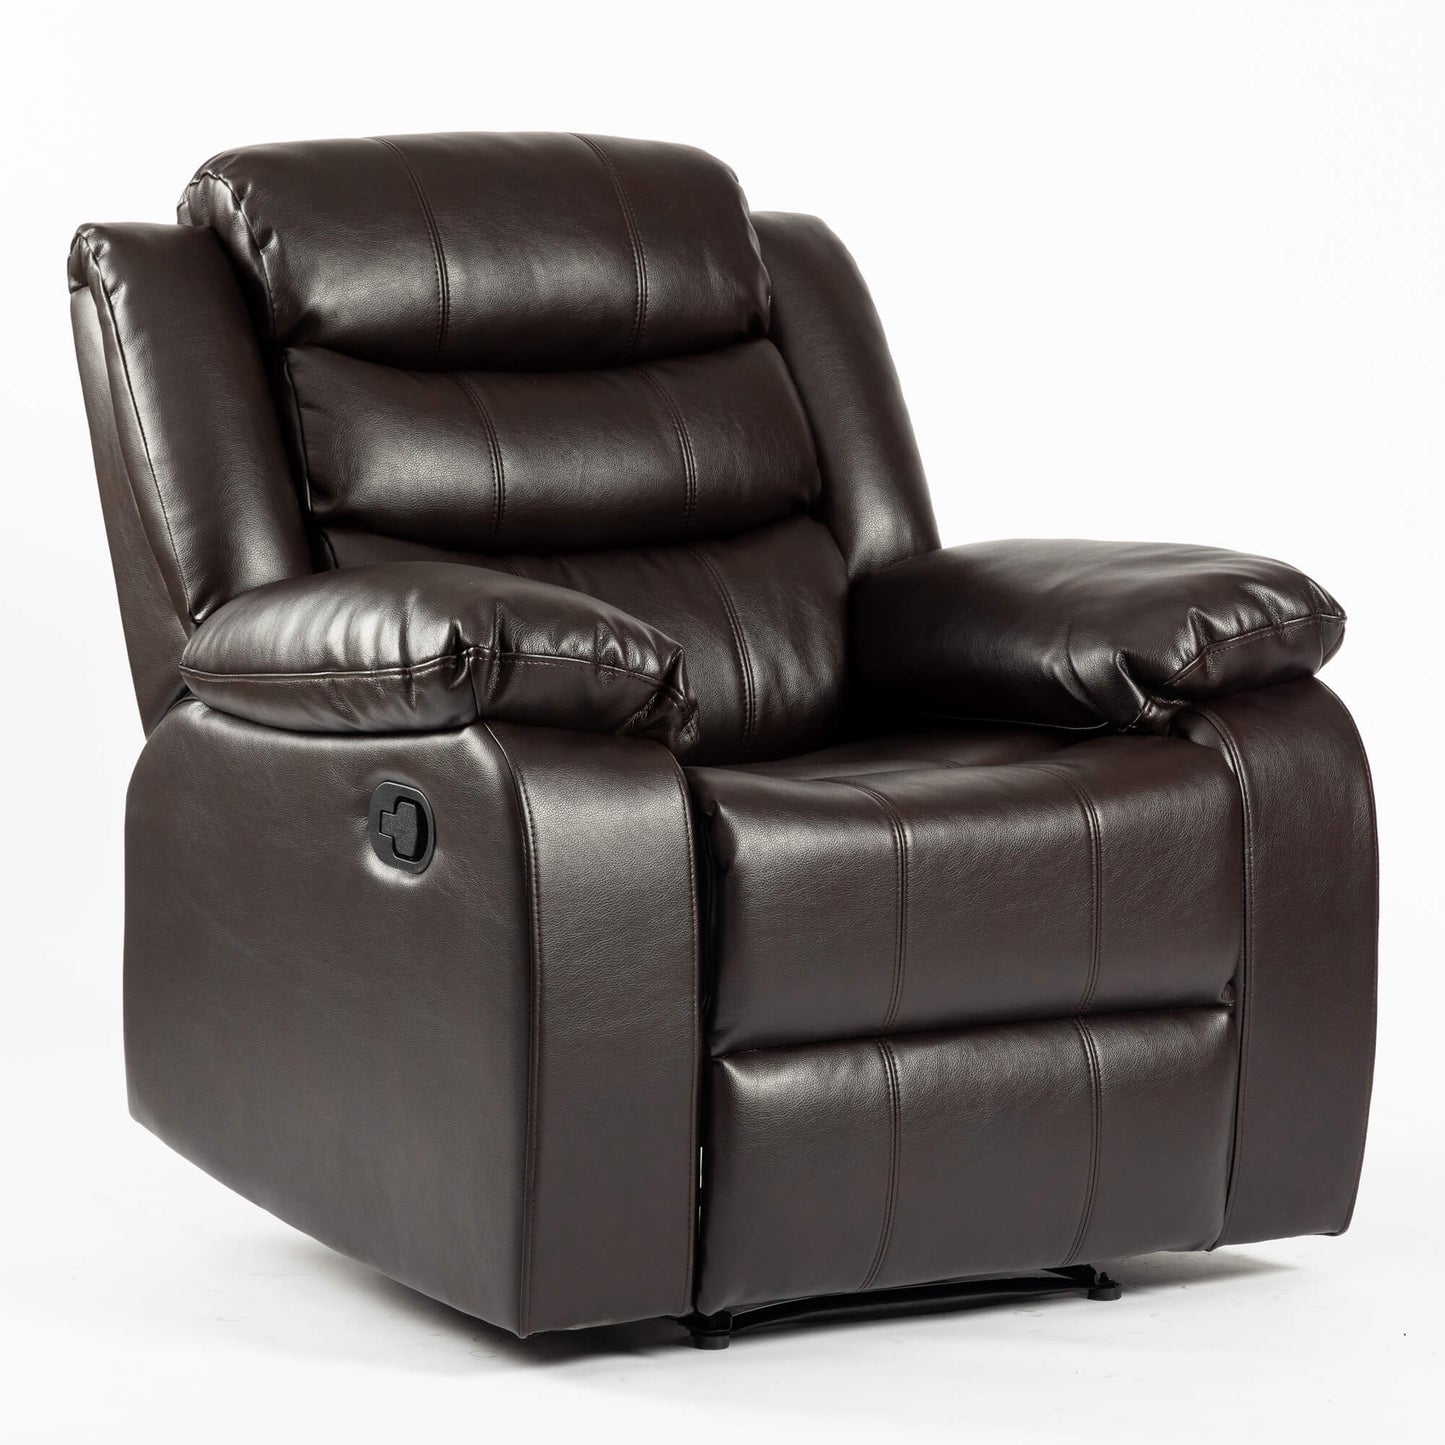 Turin Recliner Fabric Chair